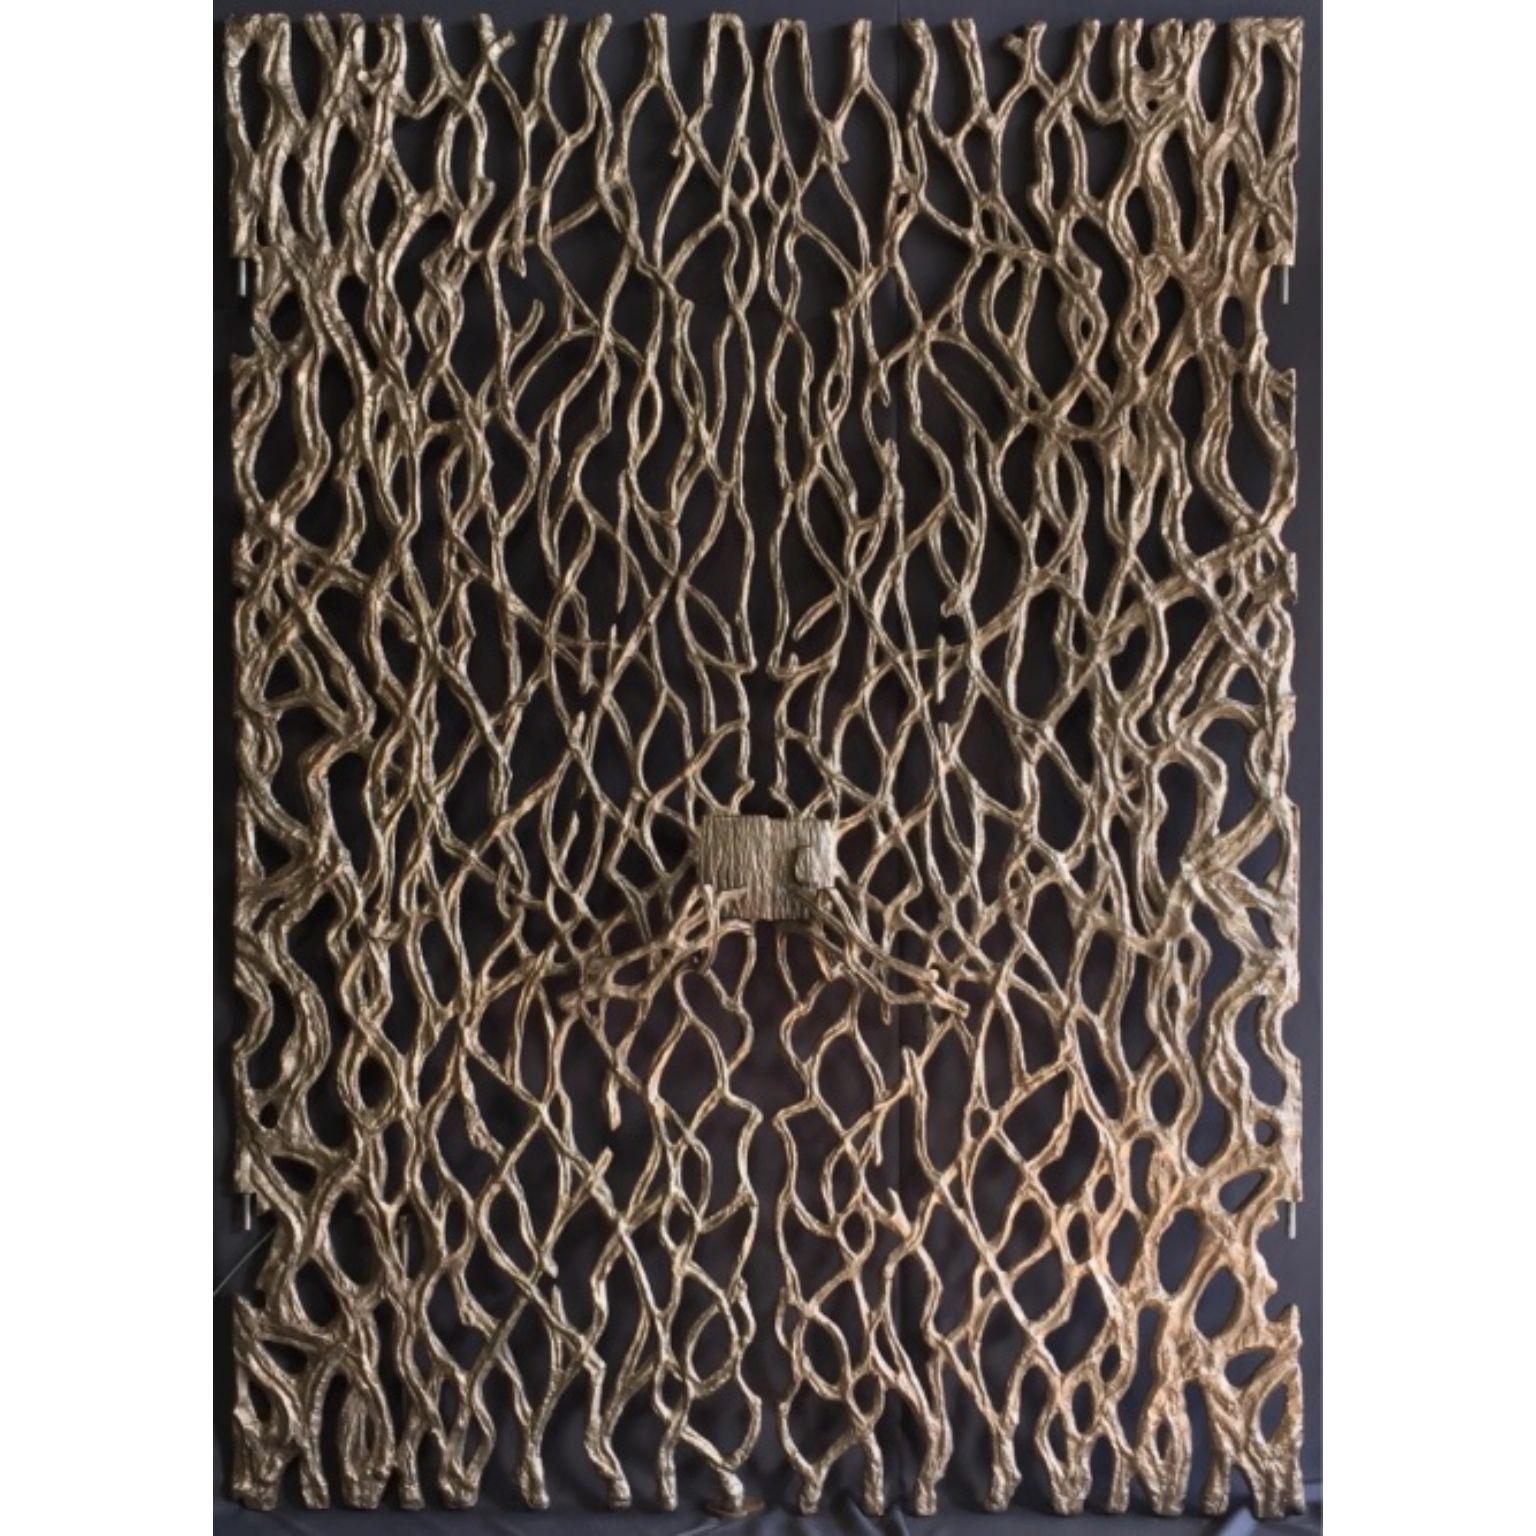 Bronze Gates by Mary Brogger
Unique piece.
Dimensions: W 183 x H 259 cm.
Materials: Bronze.

Custom sizes and finishes available. Electronic system fitting available.

Mary Brogger is an internationally recognized artist whose diverse